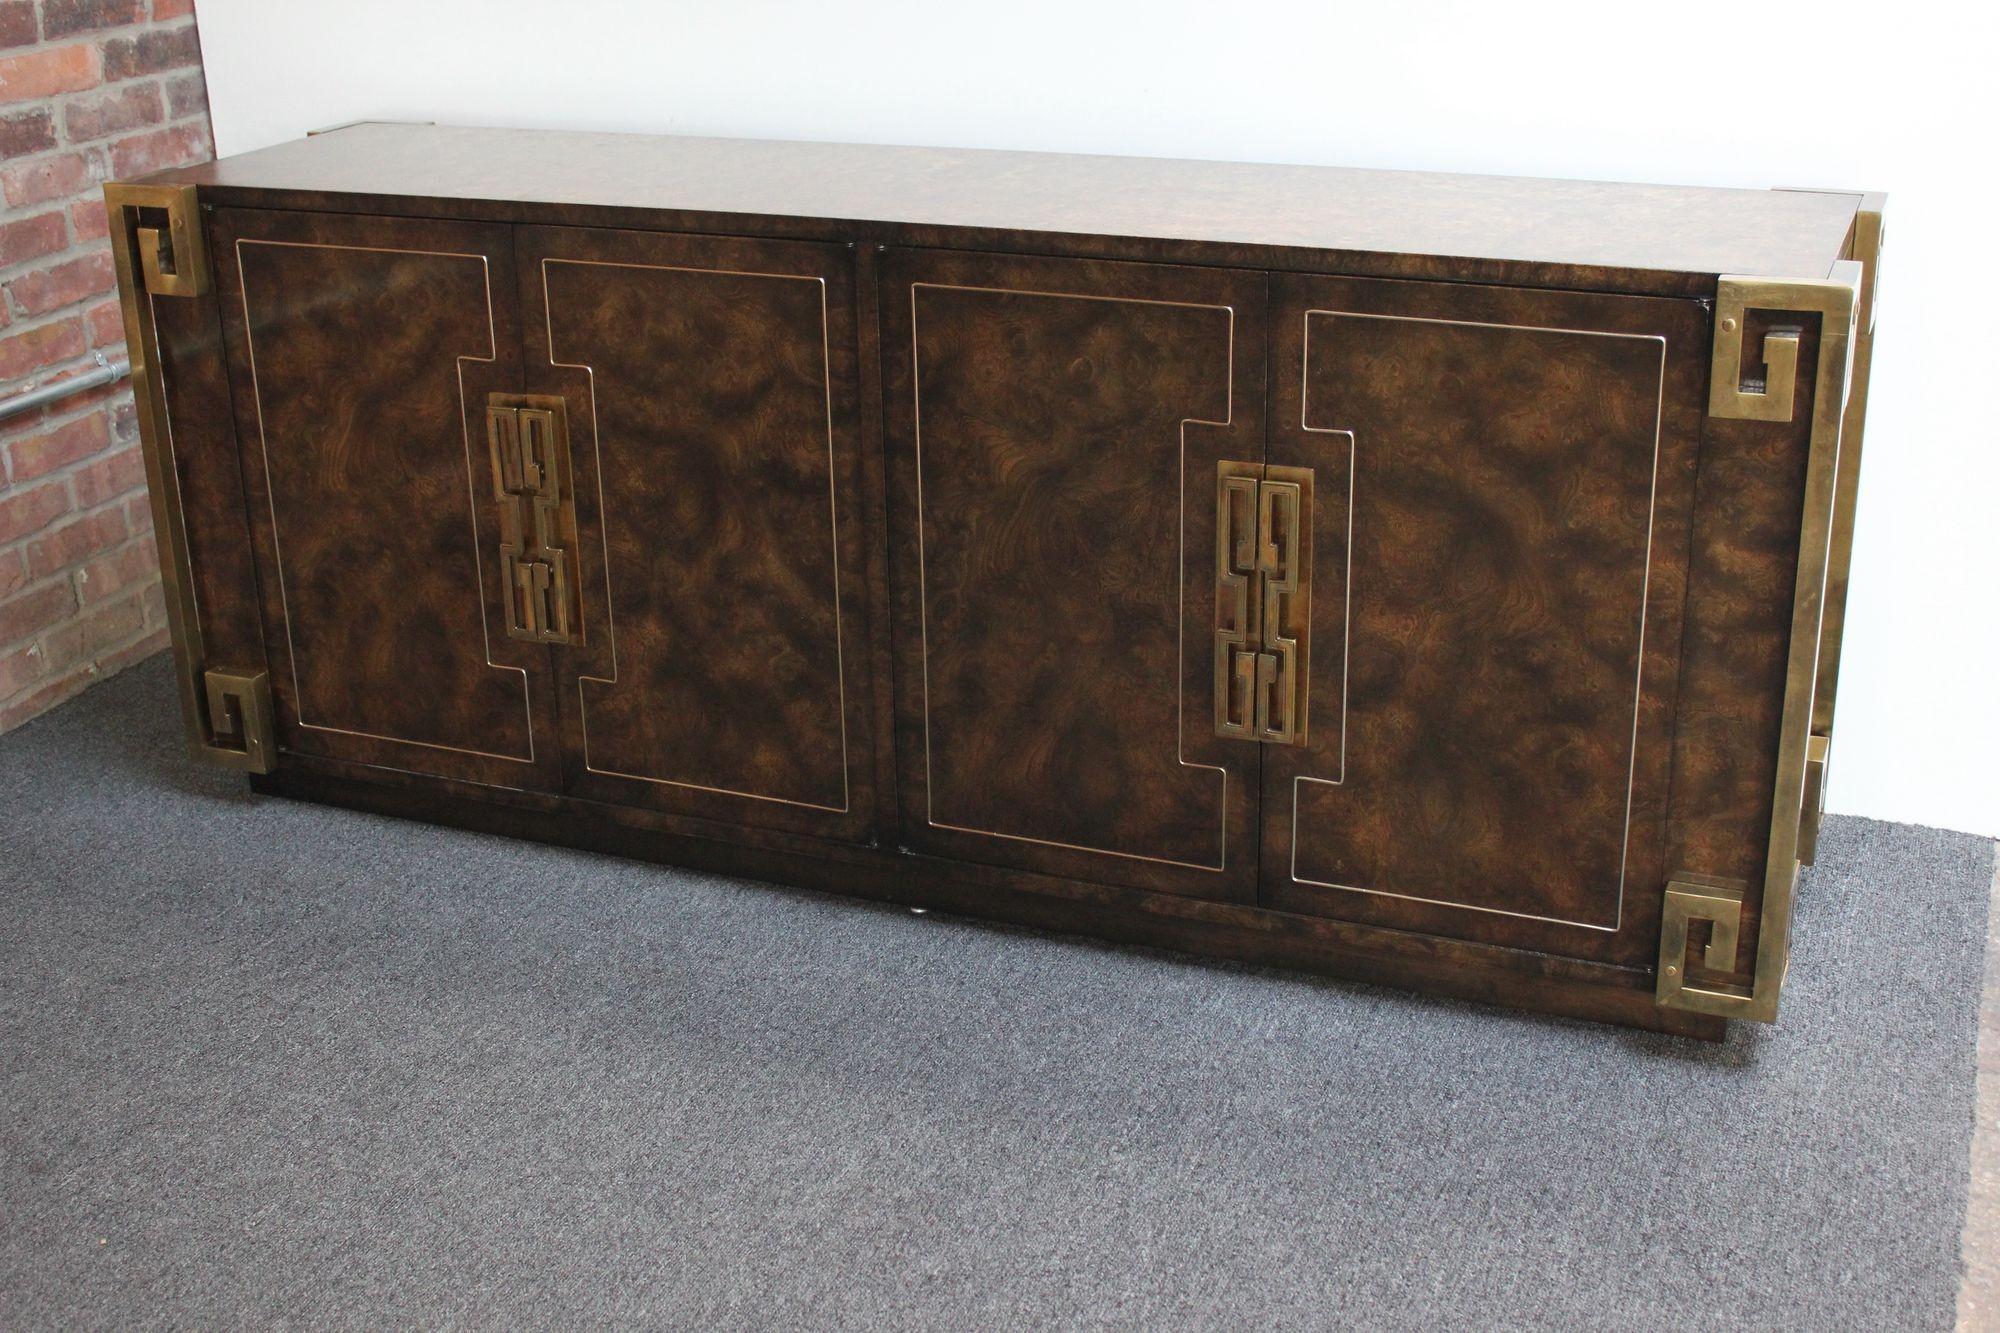 Luxurious plinth-base credenza / sideboard in burled Carpathian elm wood with inlaid brass details and highly stylized Greek Key brass hardware designed by William Doezema for Mastercraft Furniture distributed by Charak (circa 1970, USA).
The